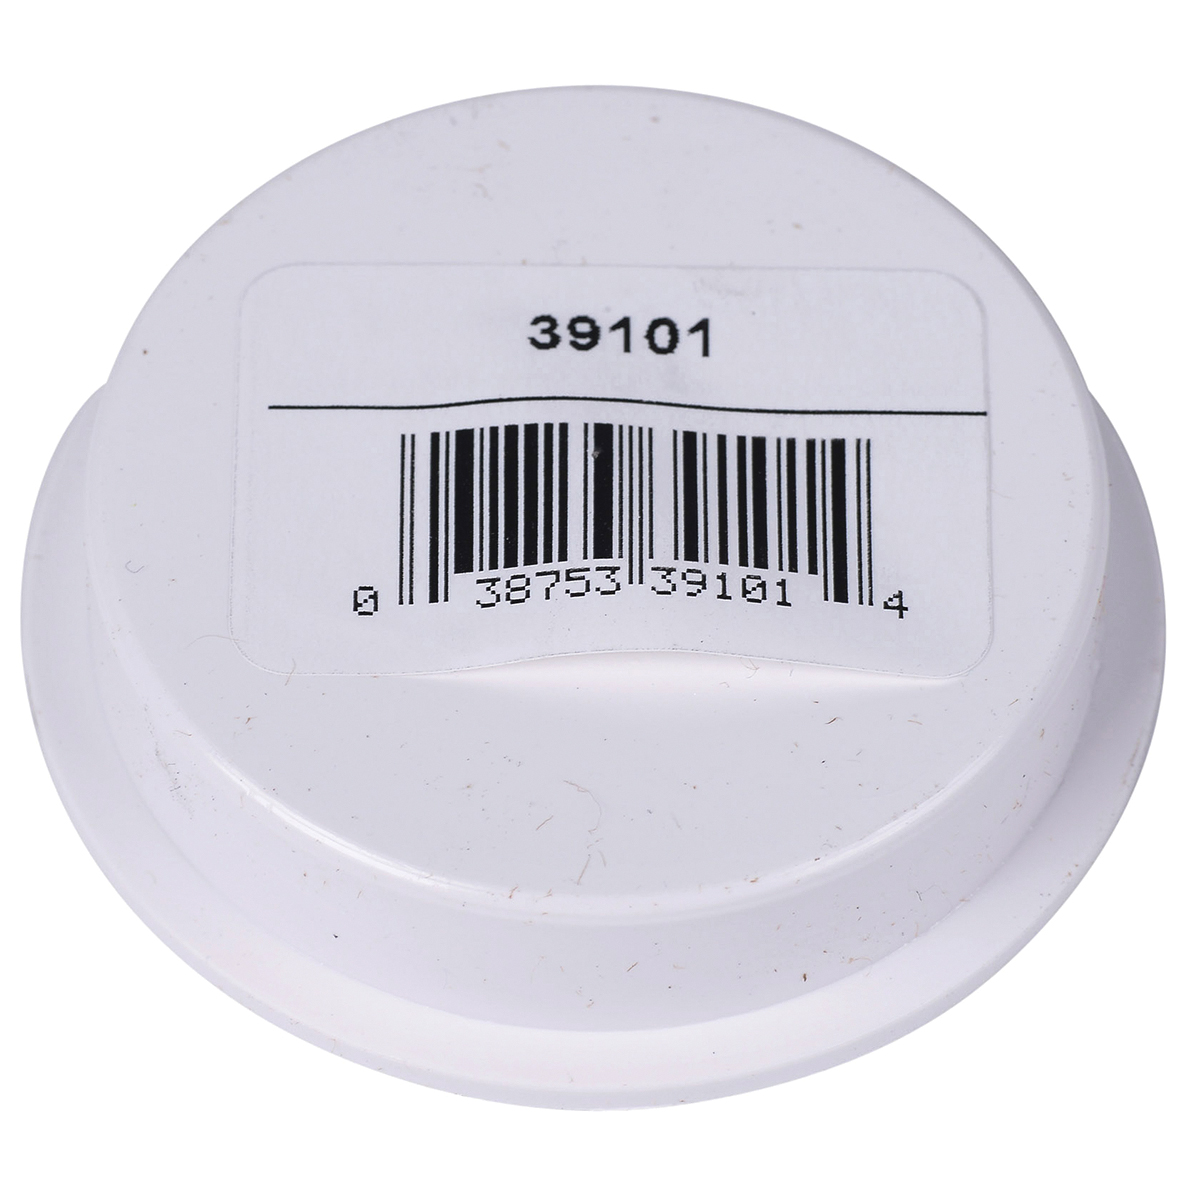 Knock-Out 39101 Test Cap with Barcode, 2 in Connection, ABS, White